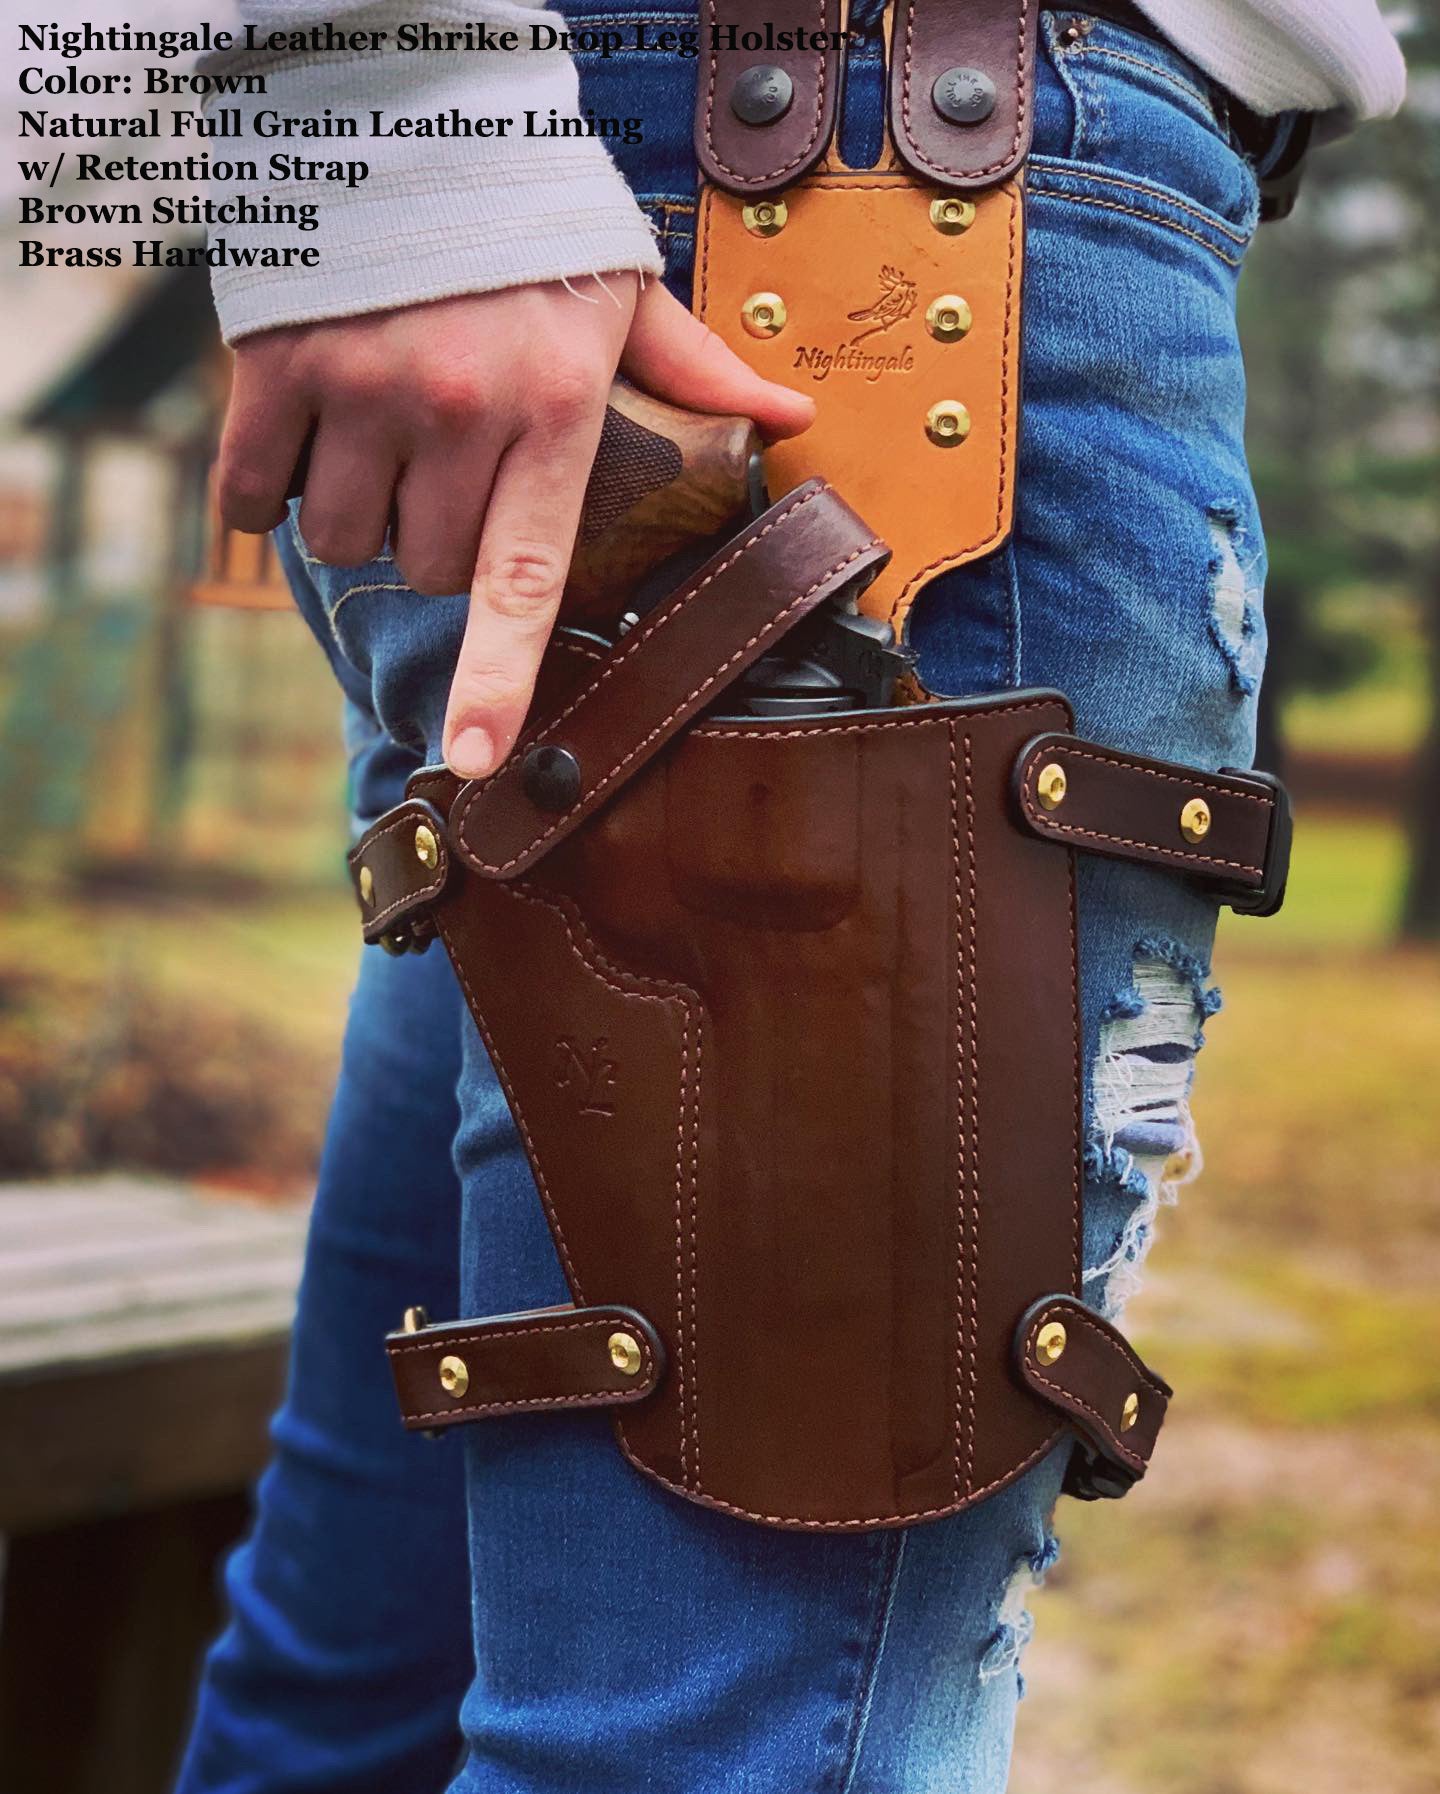 Drop Leg Holsters - When to use and how to use correctly - Monarch